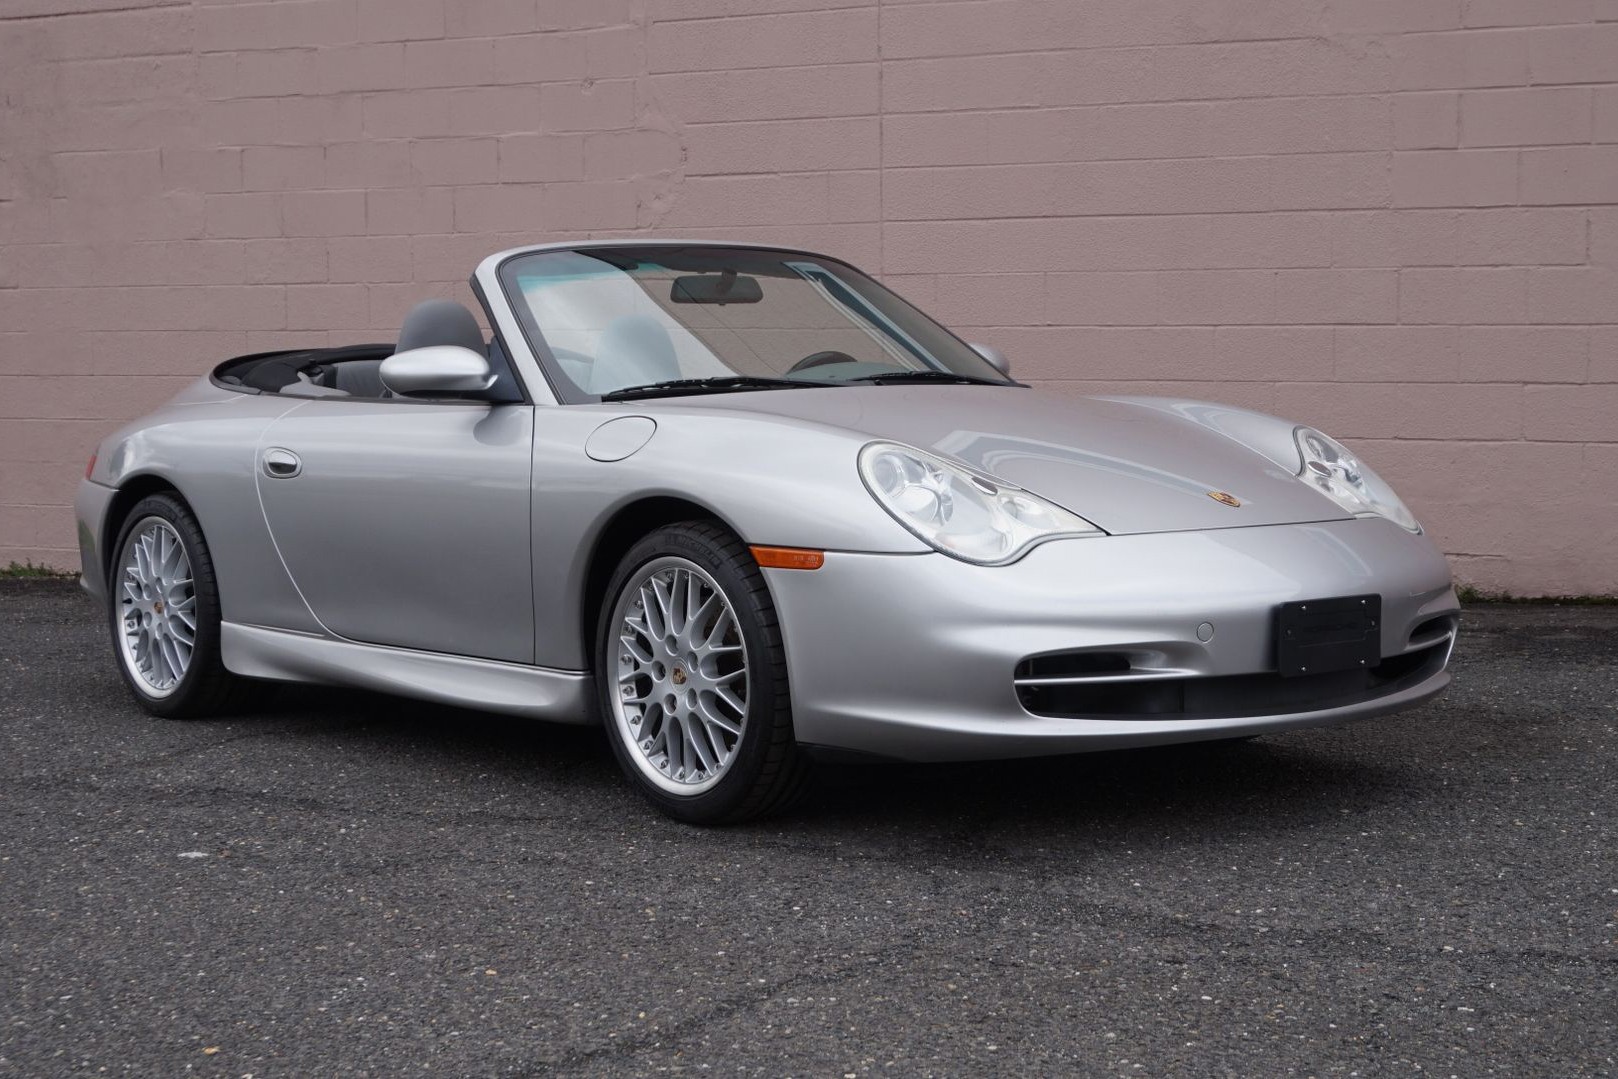 Which One-Owner Porsche Convertible Would You Choose: 1983 911 SC or 2002 996?